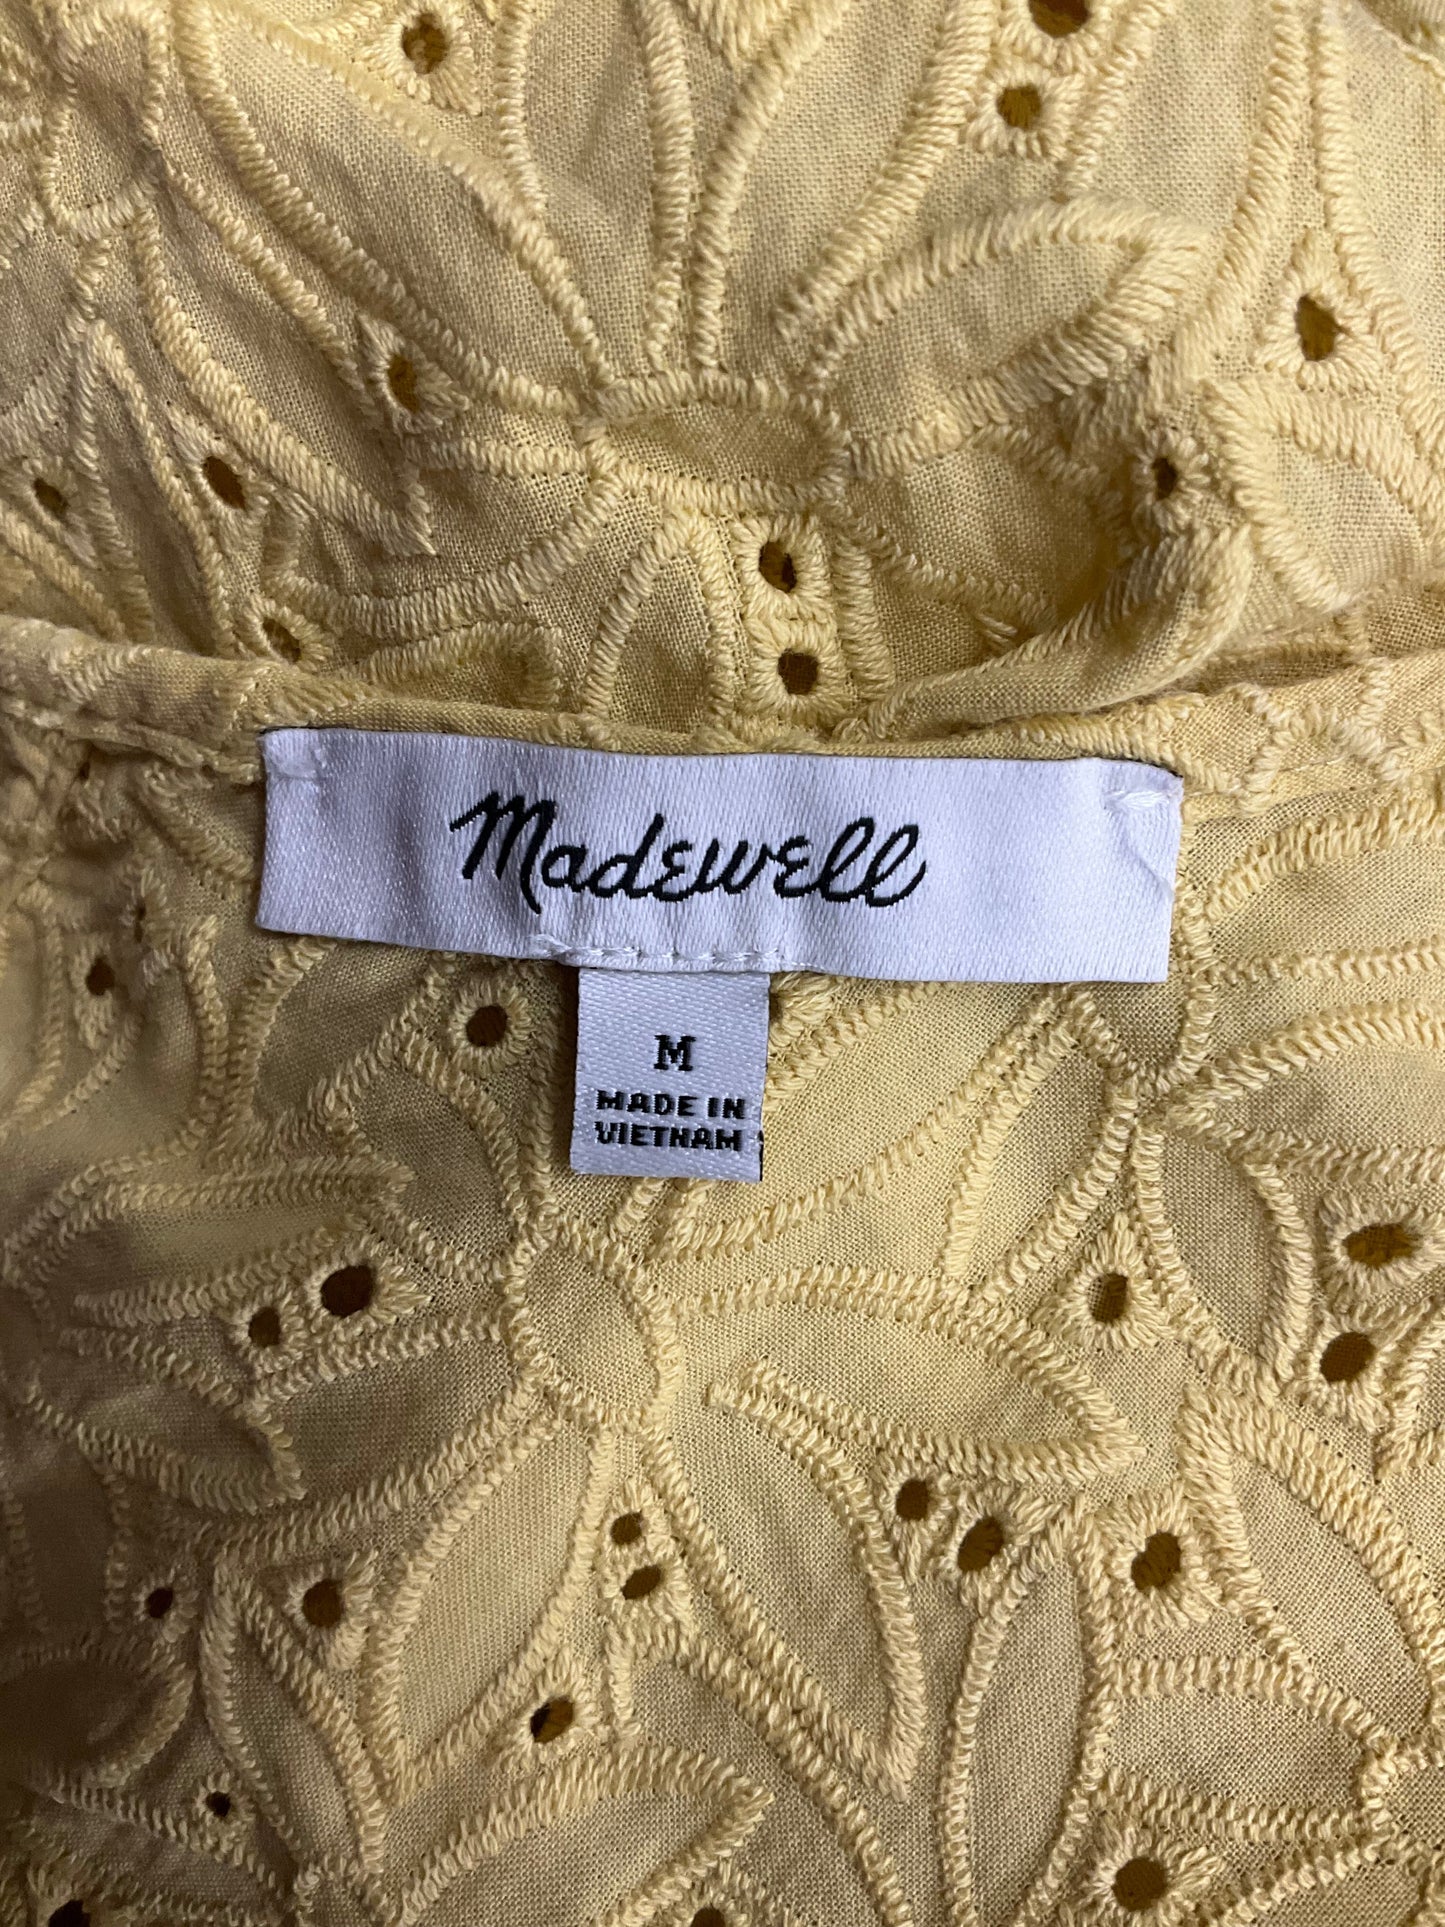 Yellow Top Short Sleeve Madewell, Size M